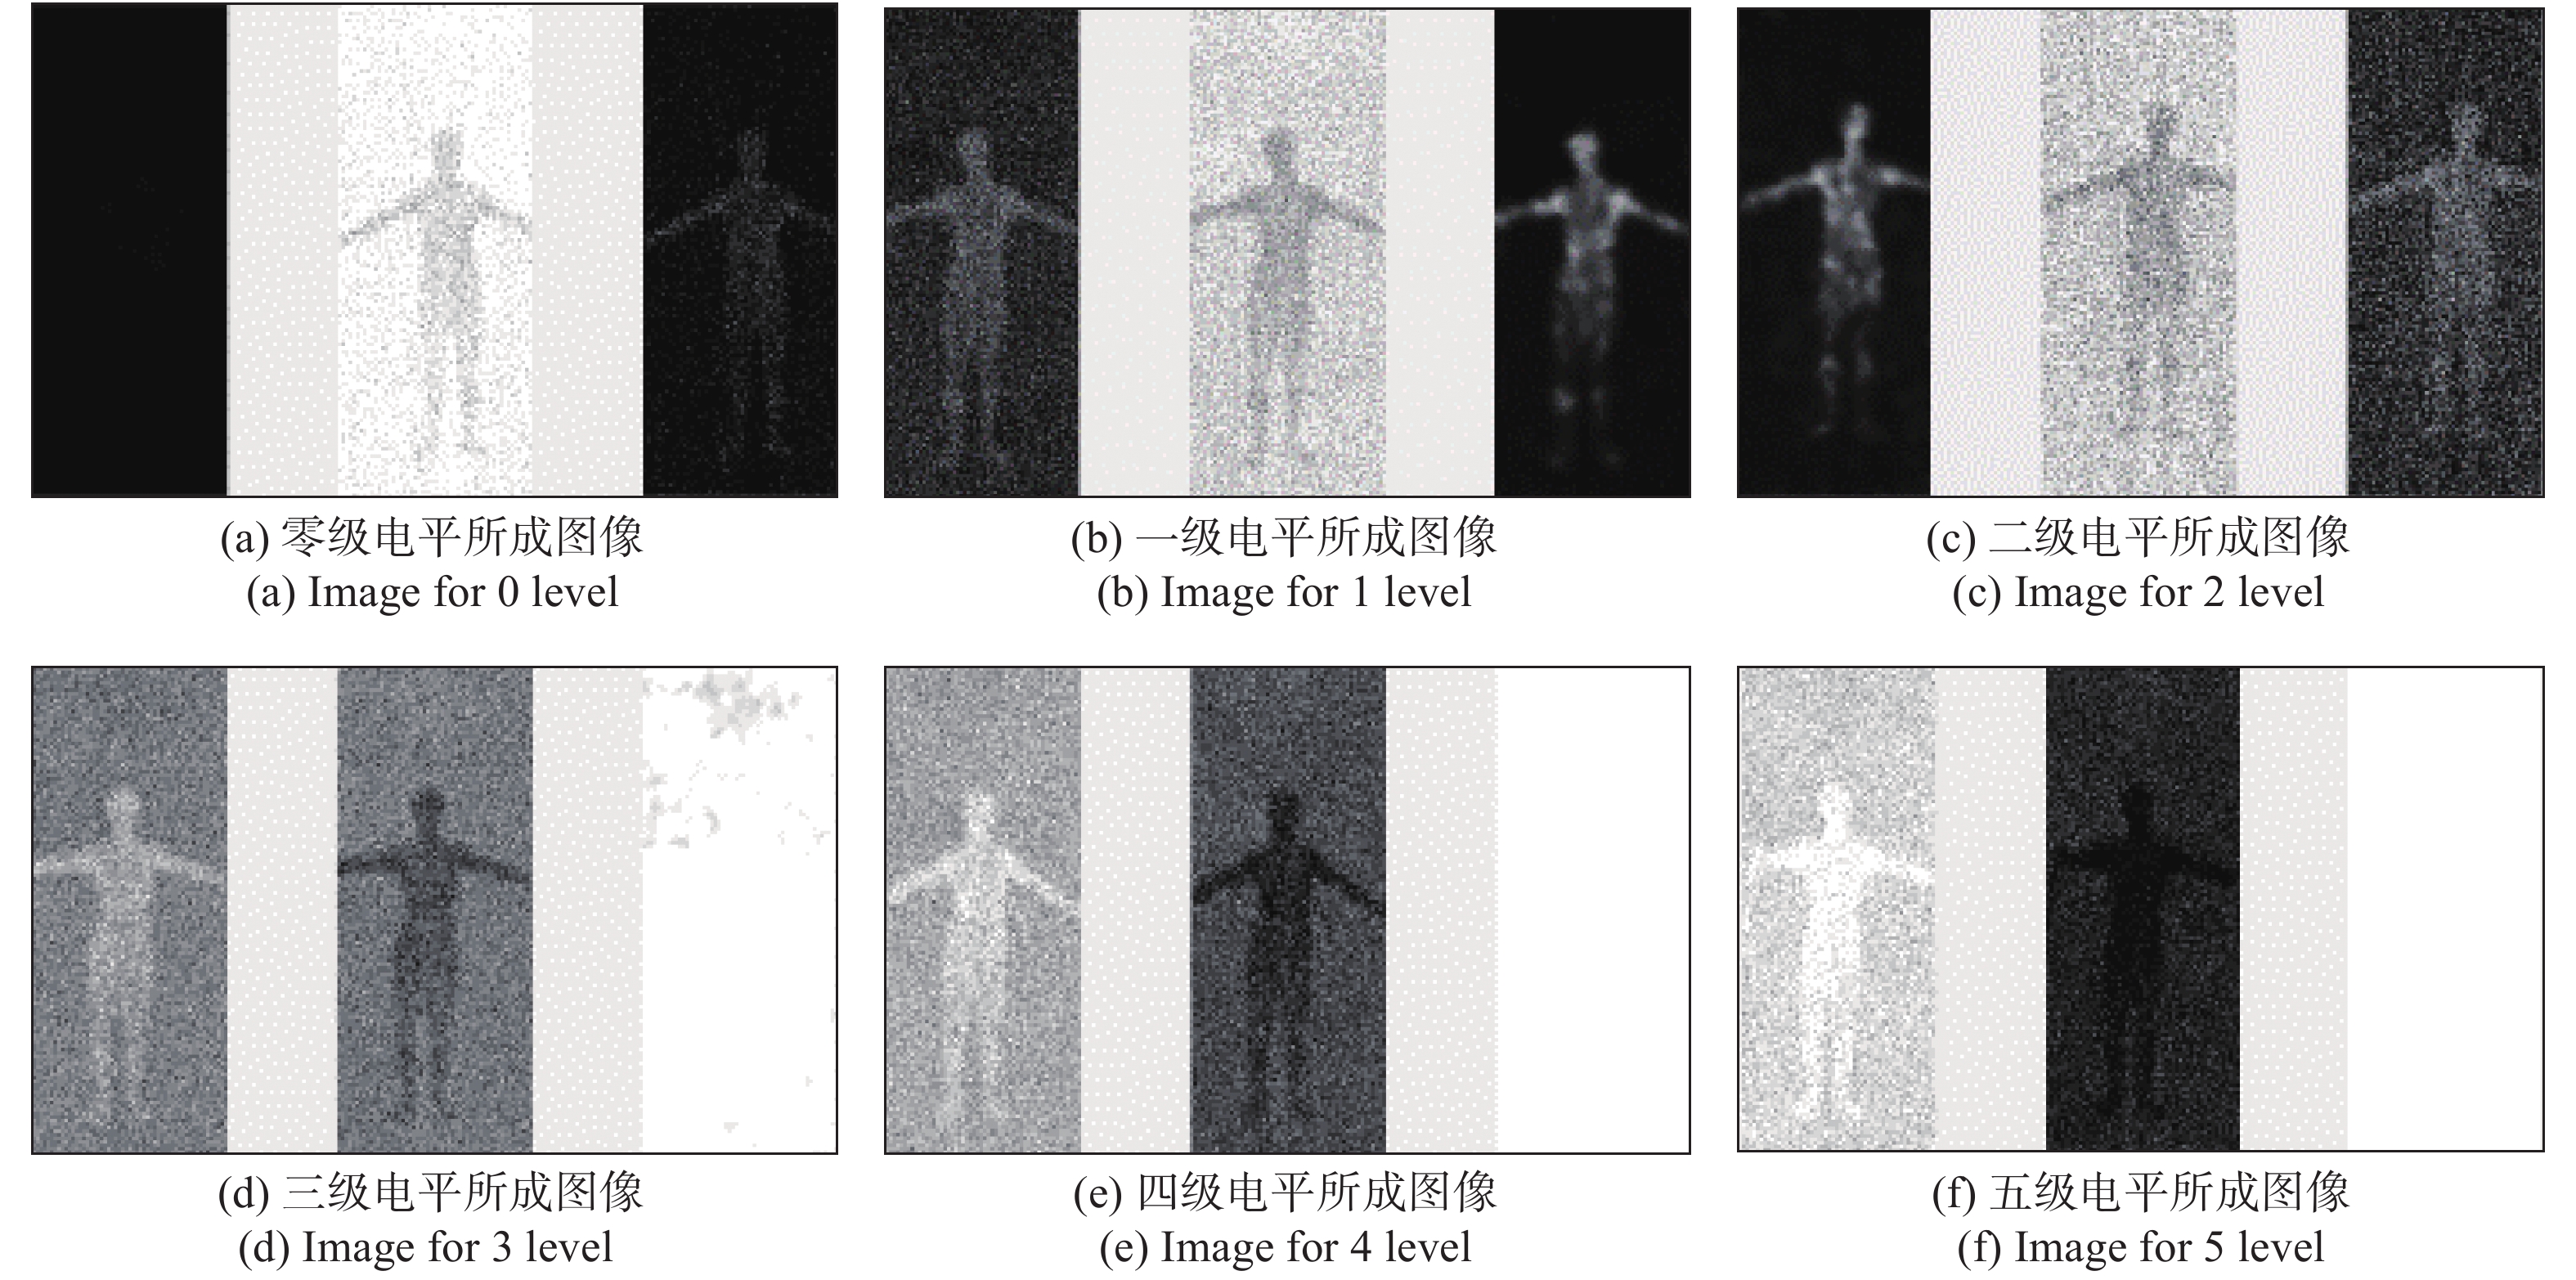 Comparison of THz imaging results for the human body under the different levels of detector